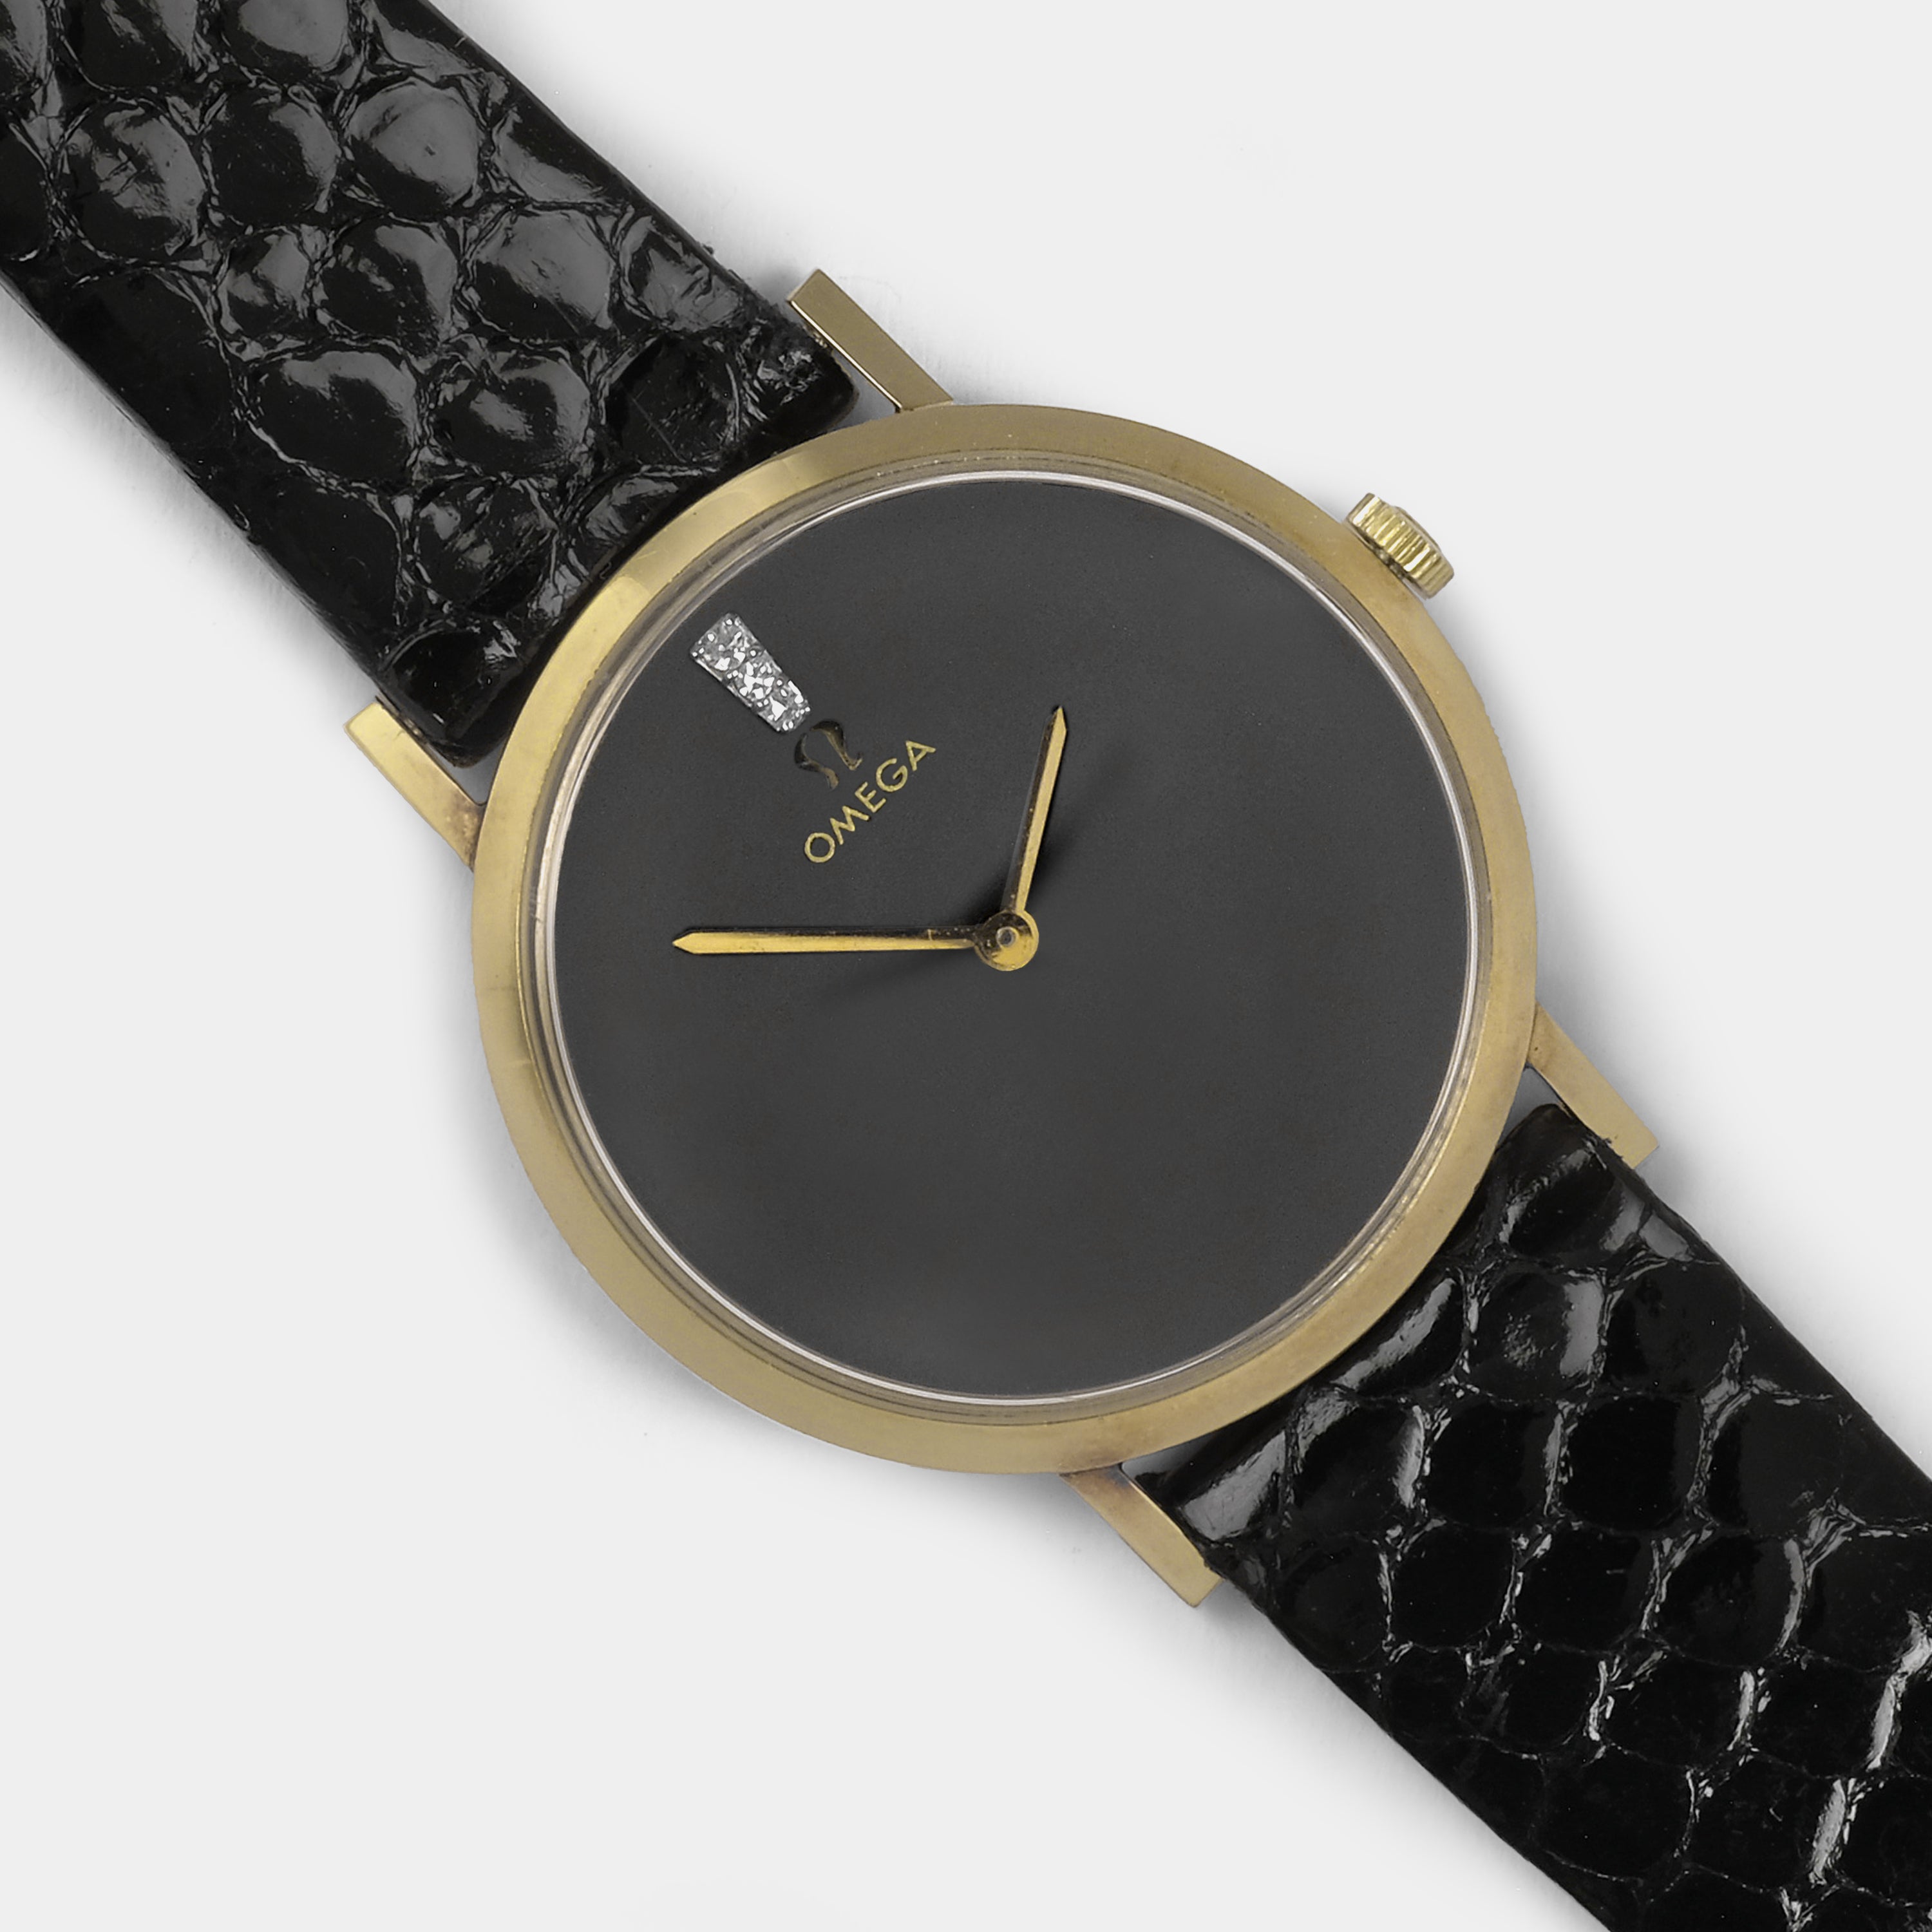 Omega D6672 Solid 14K Gold Factory (Matte Black Diamond Dial) Swiss Made Circa Late 1970s/early 1980s Wristwatch